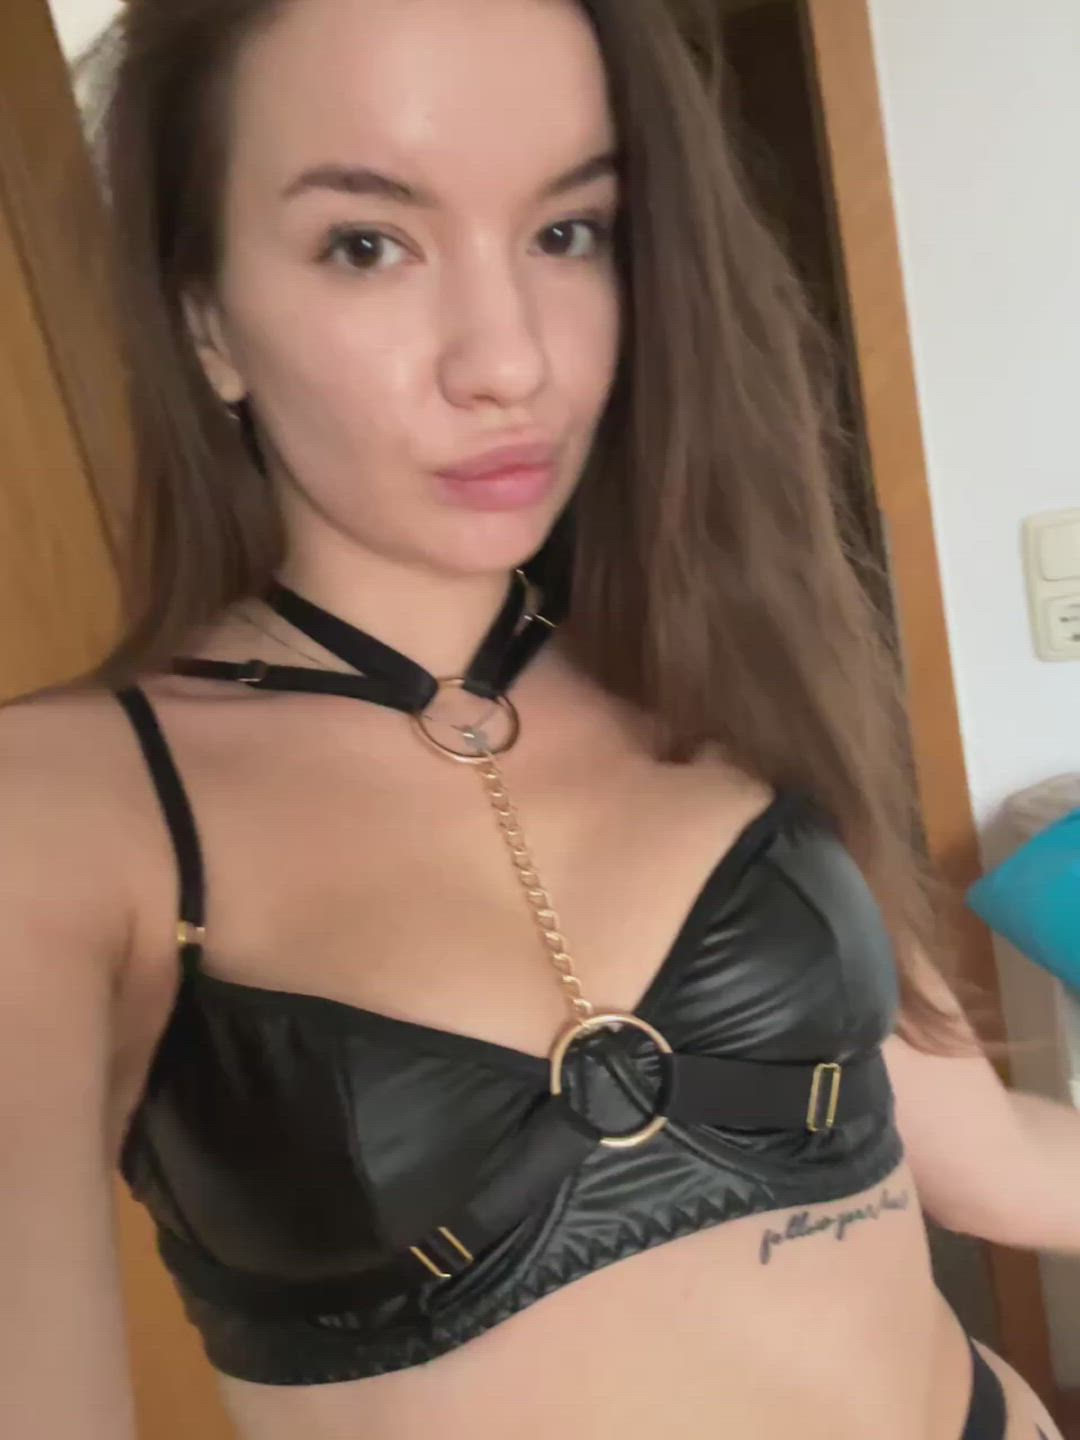 Ass porn video with onlyfans model sierrapantera69 <strong>@sierra_pantera</strong>